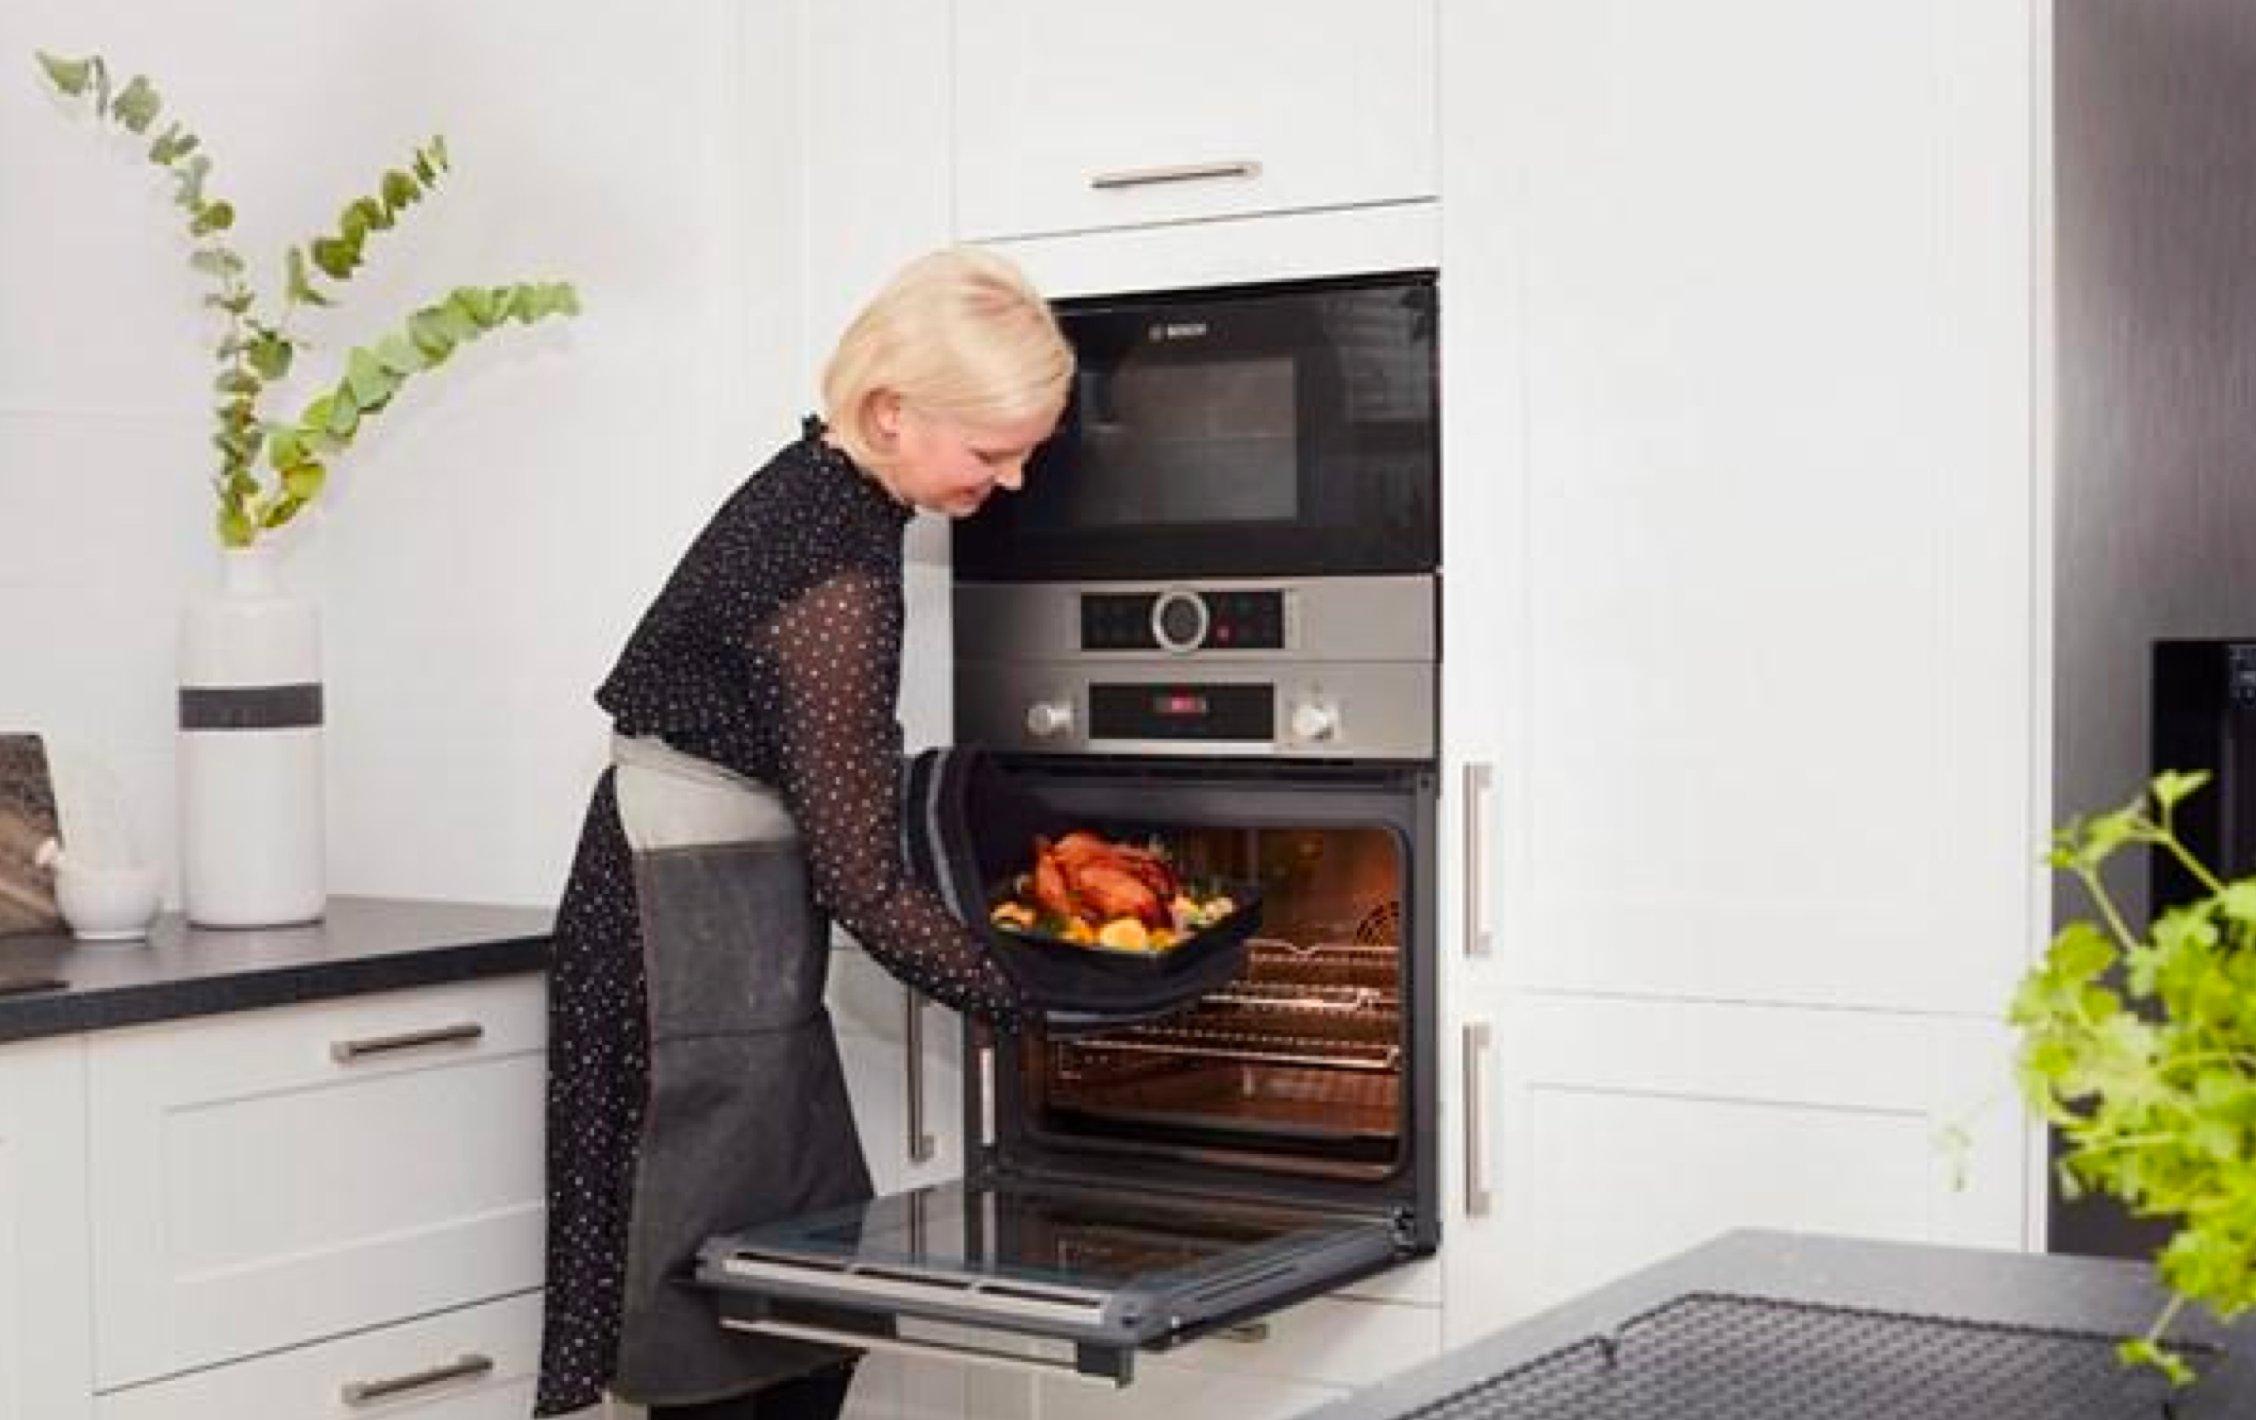 Built-in oven buying guide